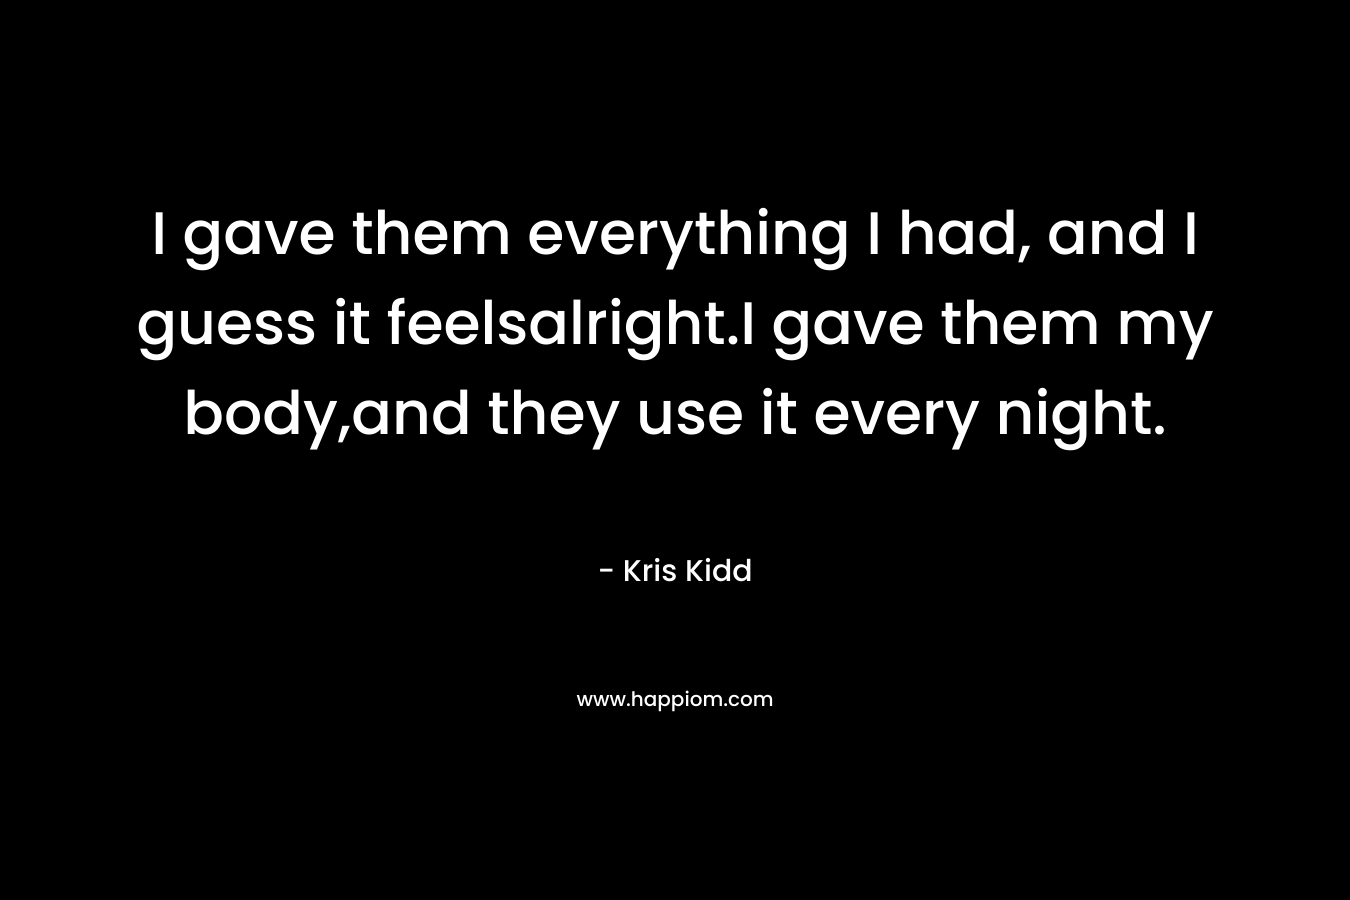 I gave them everything I had, and I guess it feelsalright.I gave them my body,and they use it every night. – Kris Kidd